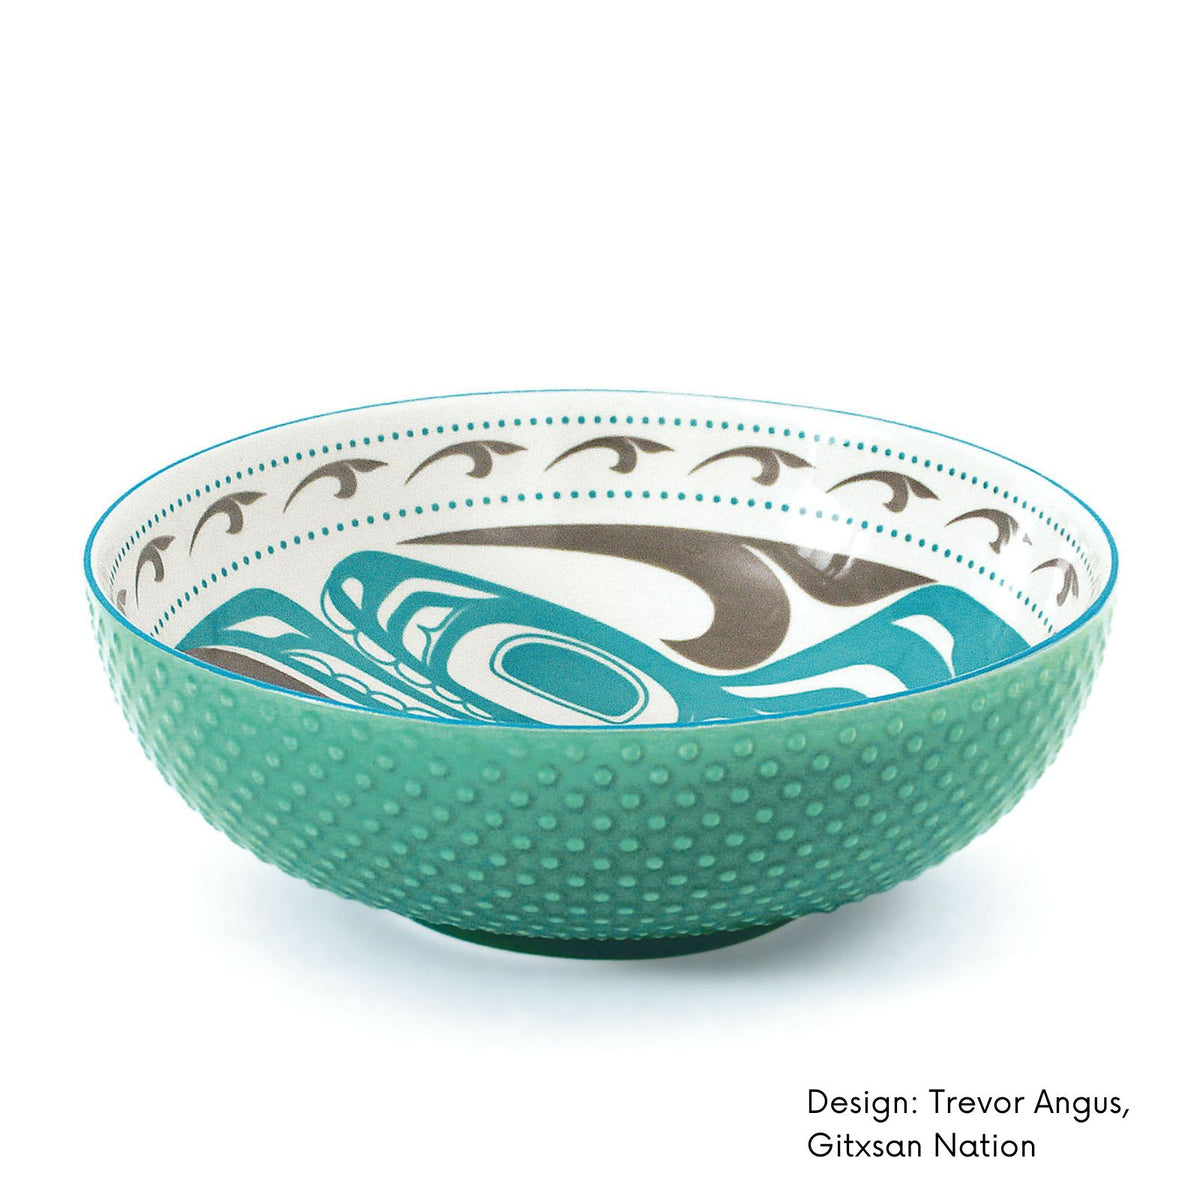 Serving Bowl with Contemporary Indigenous Artwork